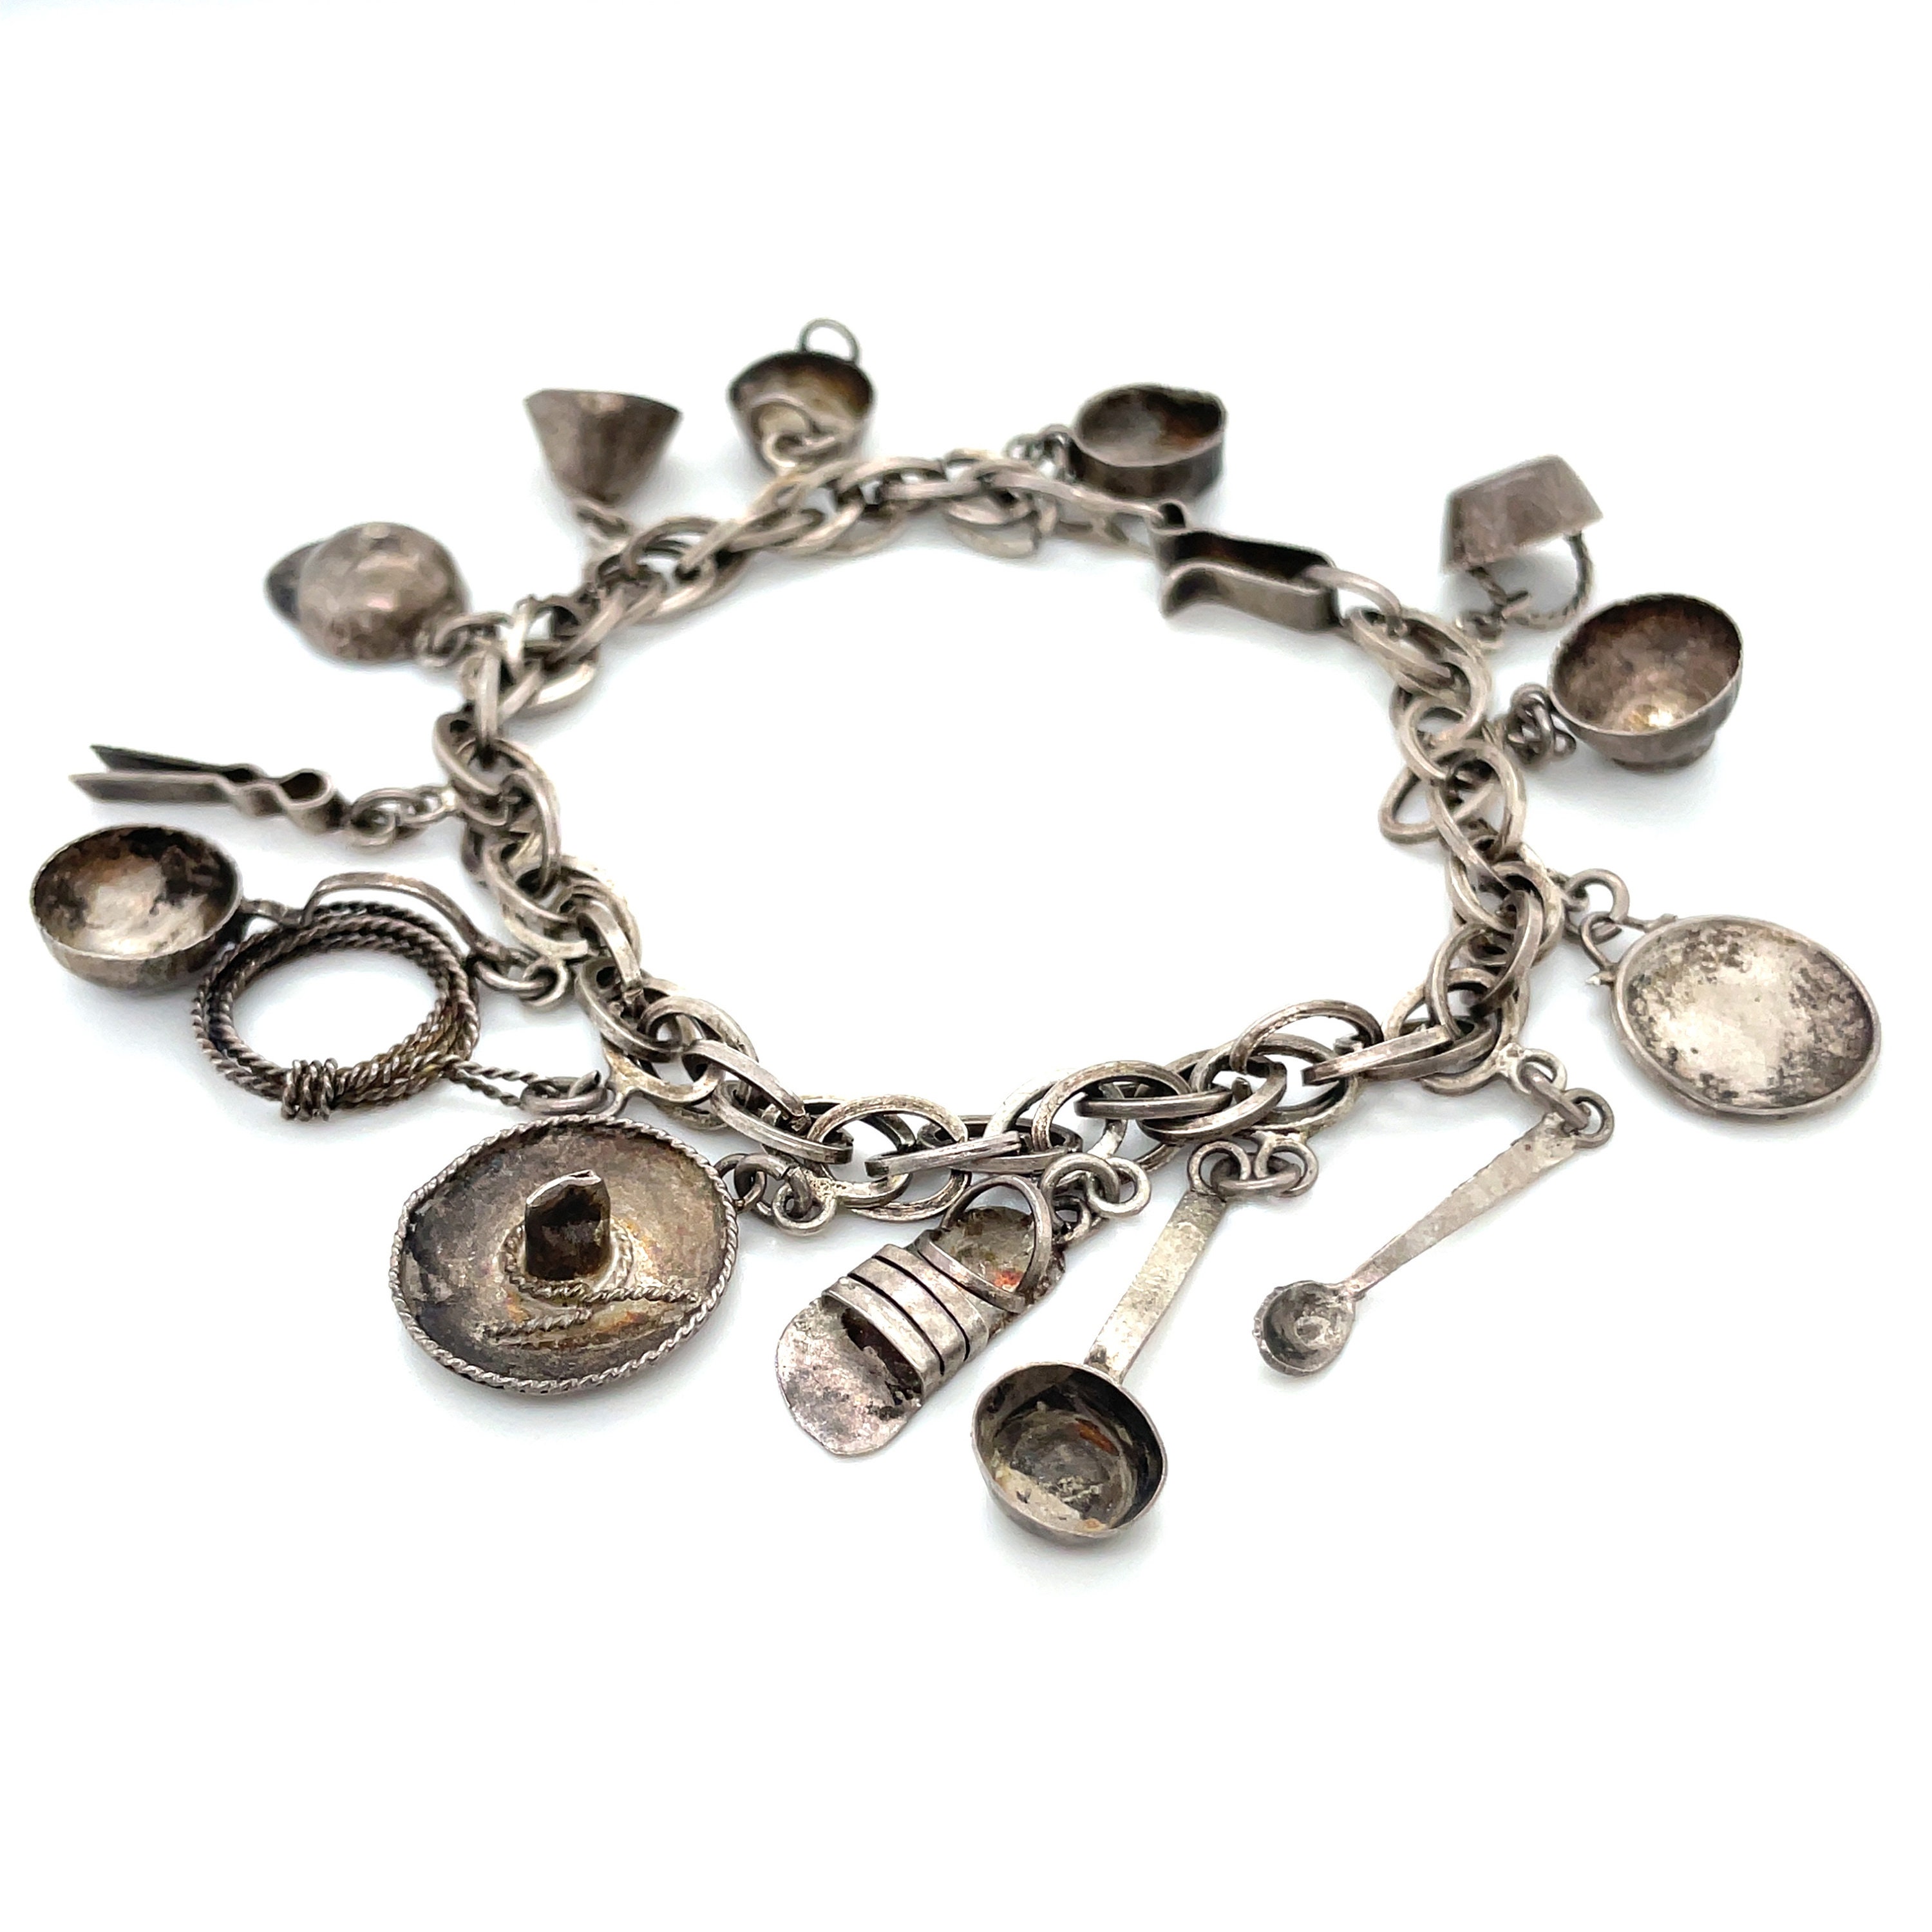 Vintage Sterling Silver Charm Bracelet and 6 Charms Mexican Silver